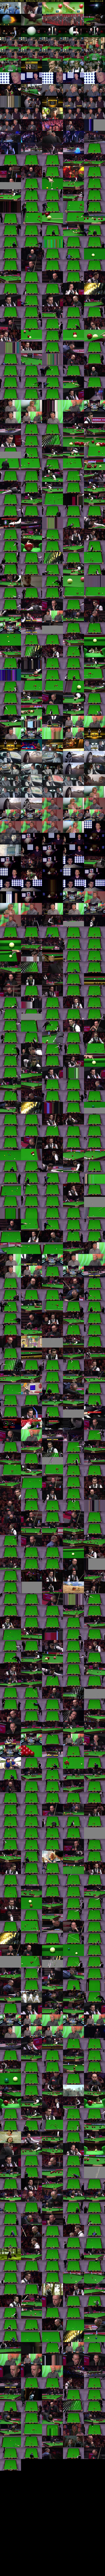 Masters Snooker (BBC TWO) Wednesday 18 January 2017 13:00 - 17:00